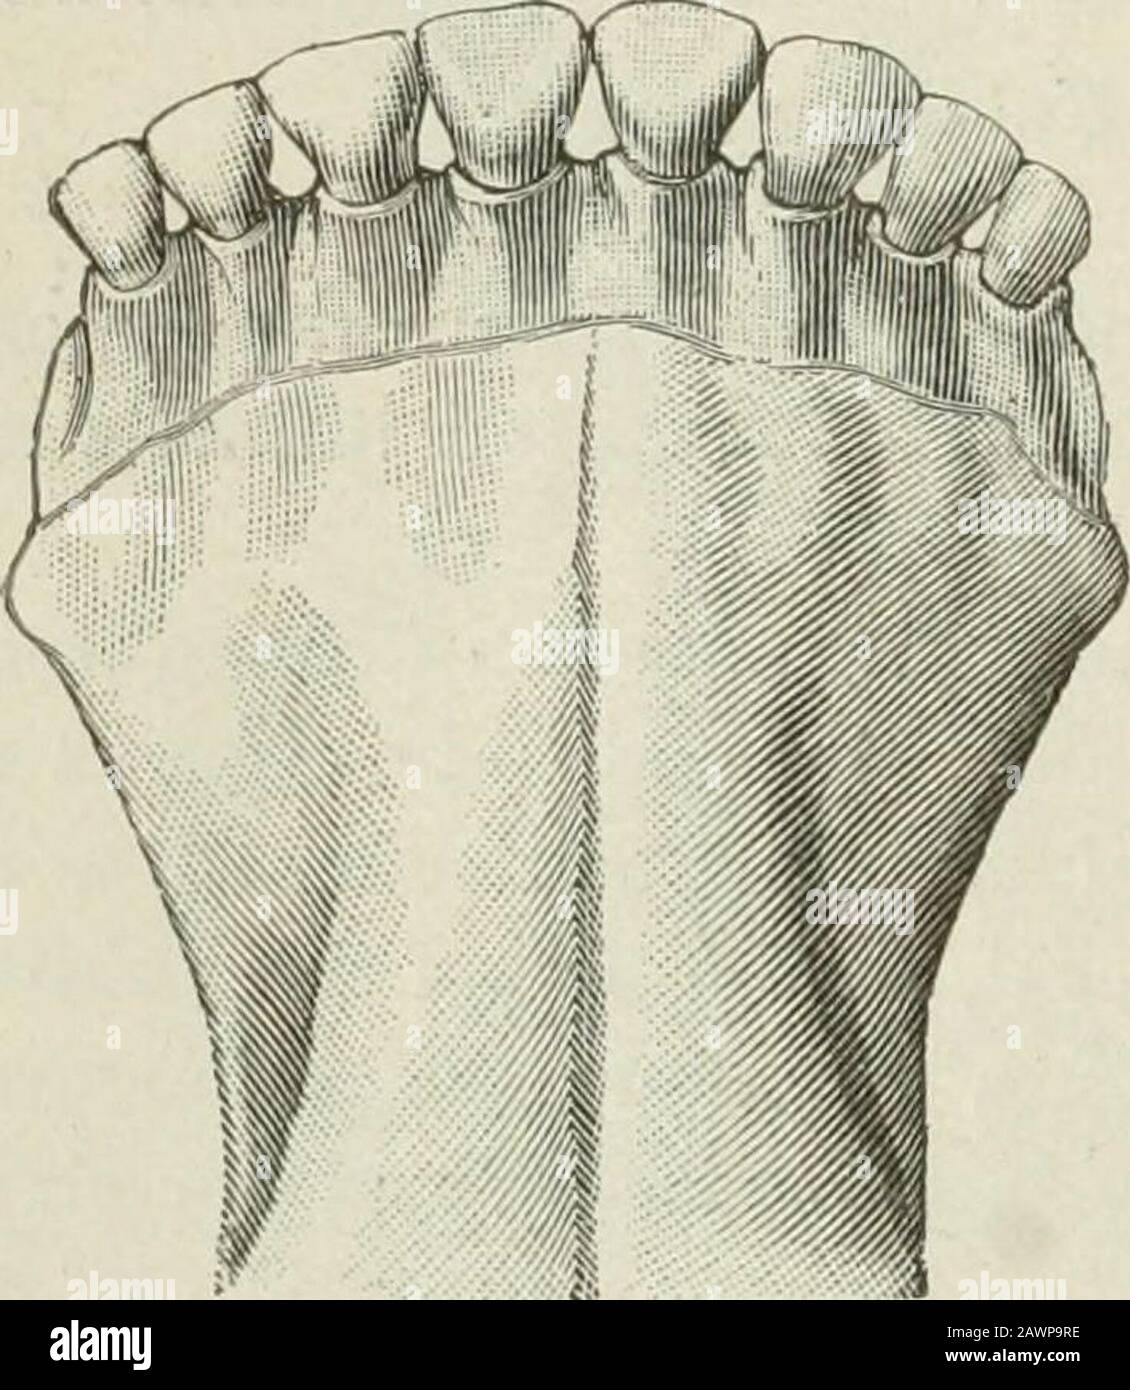 Handbook of meat inspection . three years; of the middle incisors, three and cme-halfto four years ; of the coruers, four and one-half to five years. Thepermanent teeth are yellowish, without a neck, and furnished withfurrows on the labial surface. The further determination of age ia 222 APPEABANCE AND DIFFERENTIATION OF MEAT AND ORGANS horses is made according to tlie degree of wear. Tliis is indicateduntil the nintli year in the incisors of tlie lower jaw, and until tlietwelfth year in tliose of the upper jaw, by the loss of the marks;,later, by the so-called round, triangulär and inverted o Stock Photo